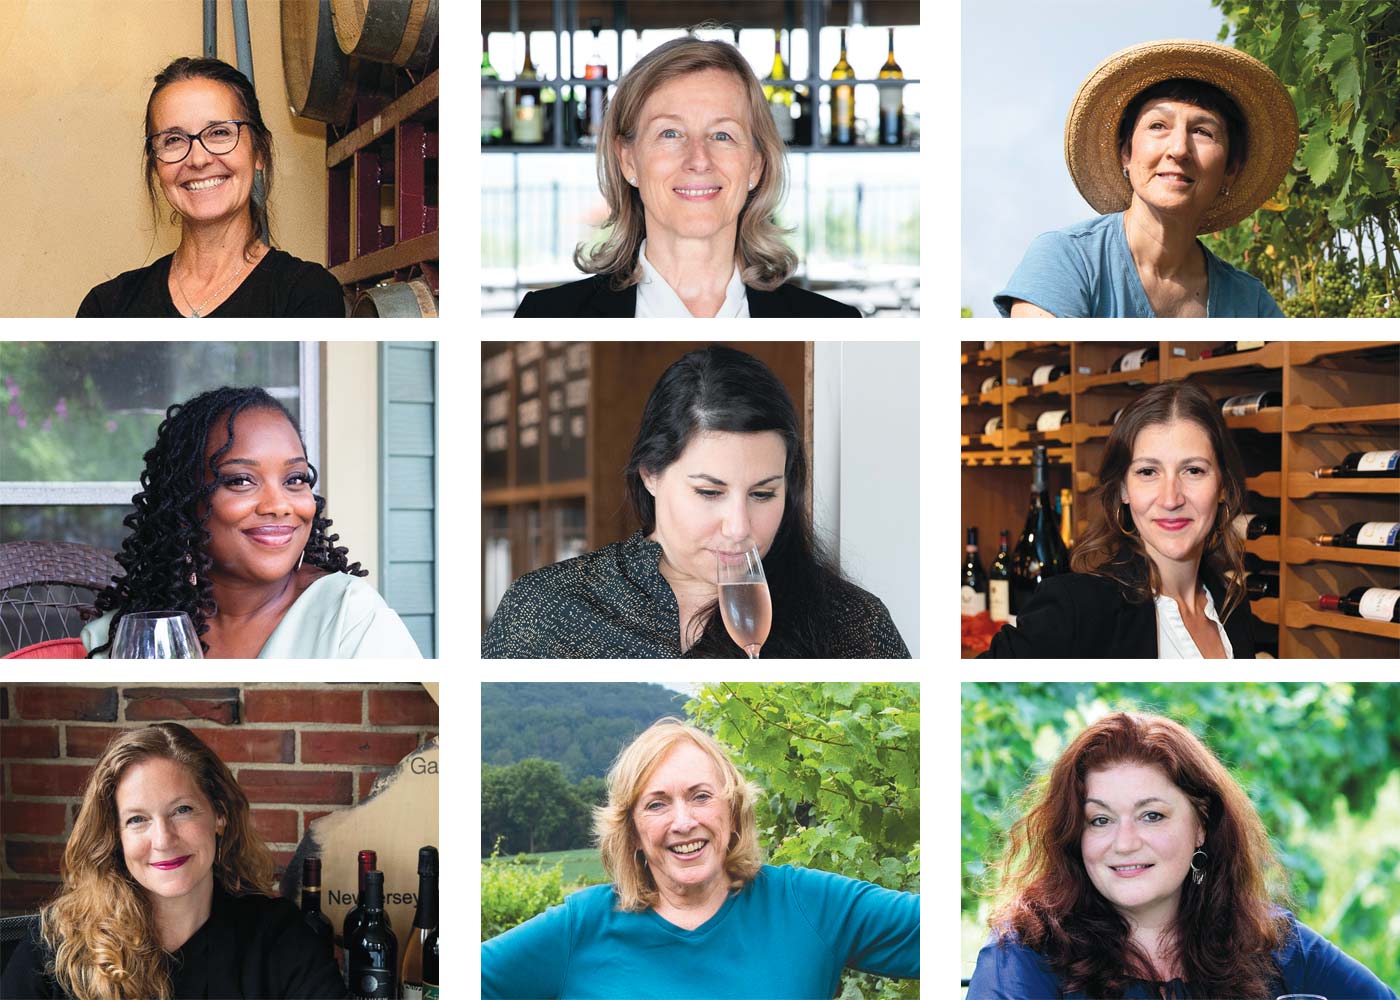 Important women in the New Jersey wine industry